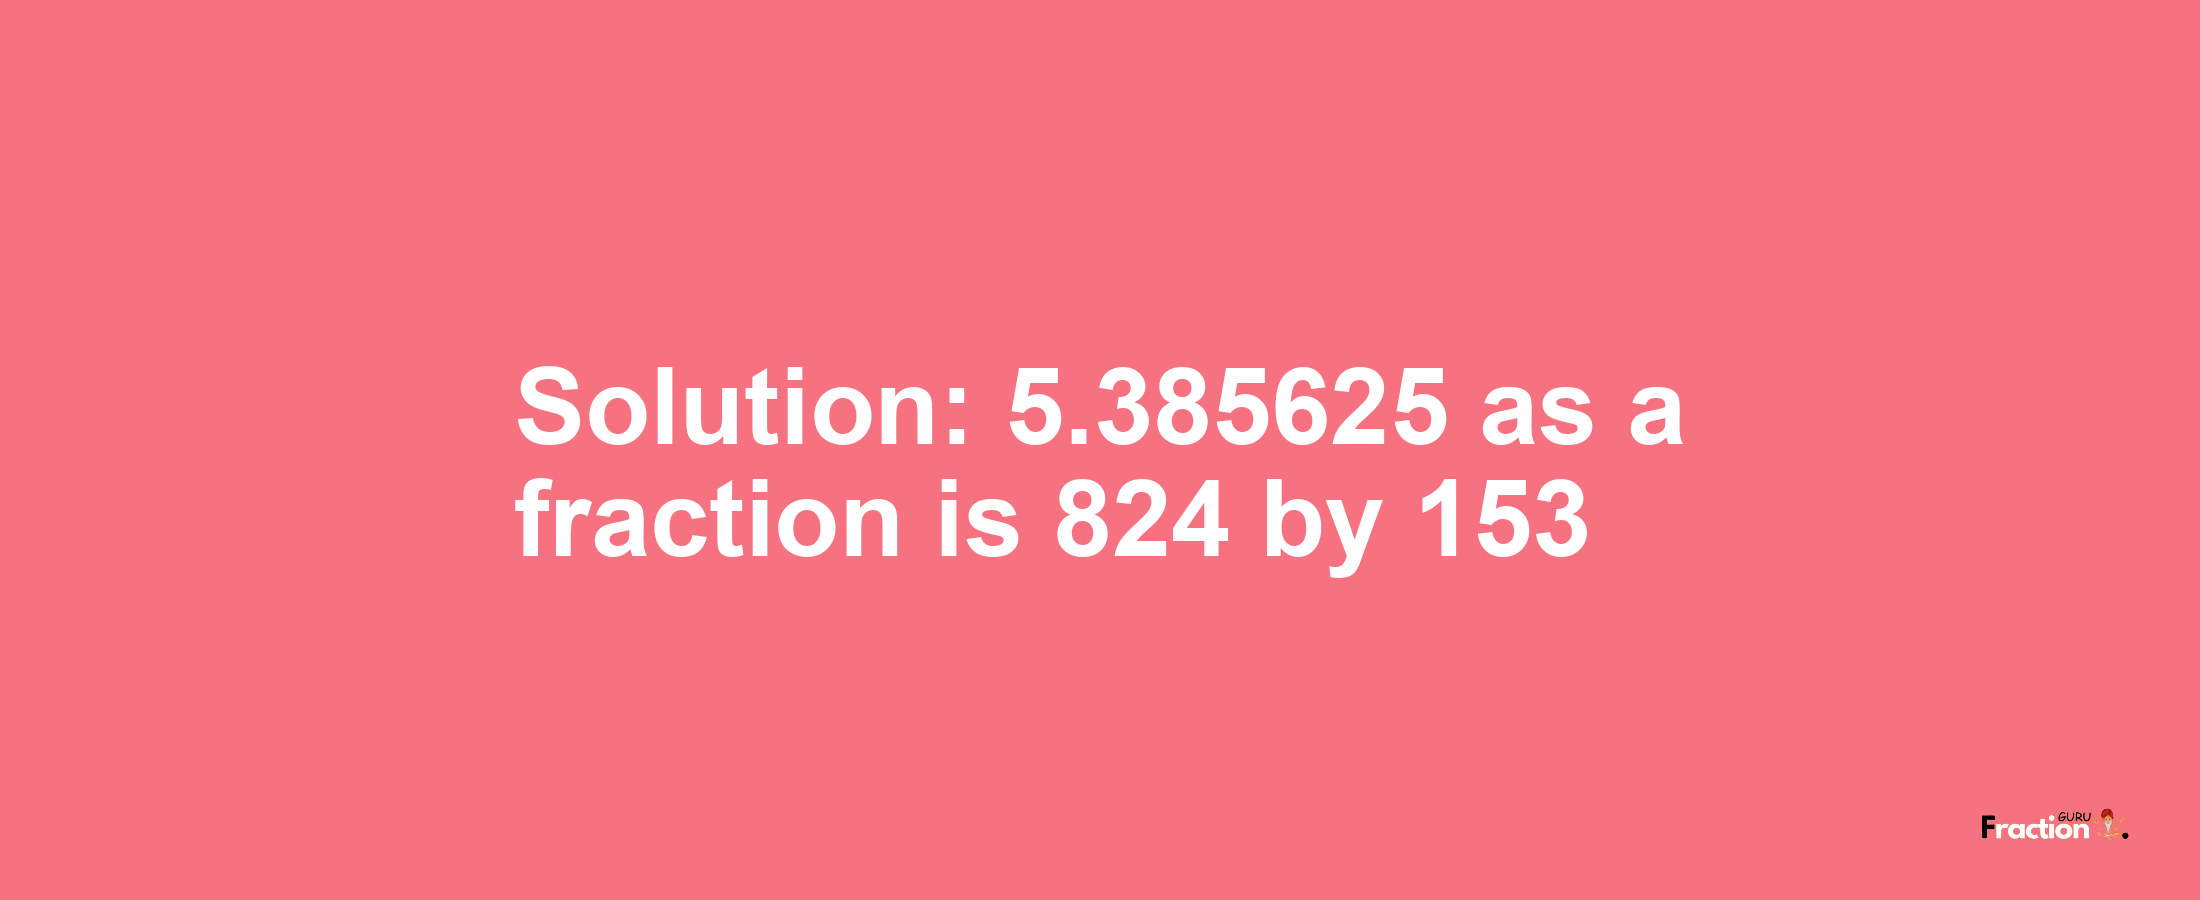 Solution:5.385625 as a fraction is 824/153